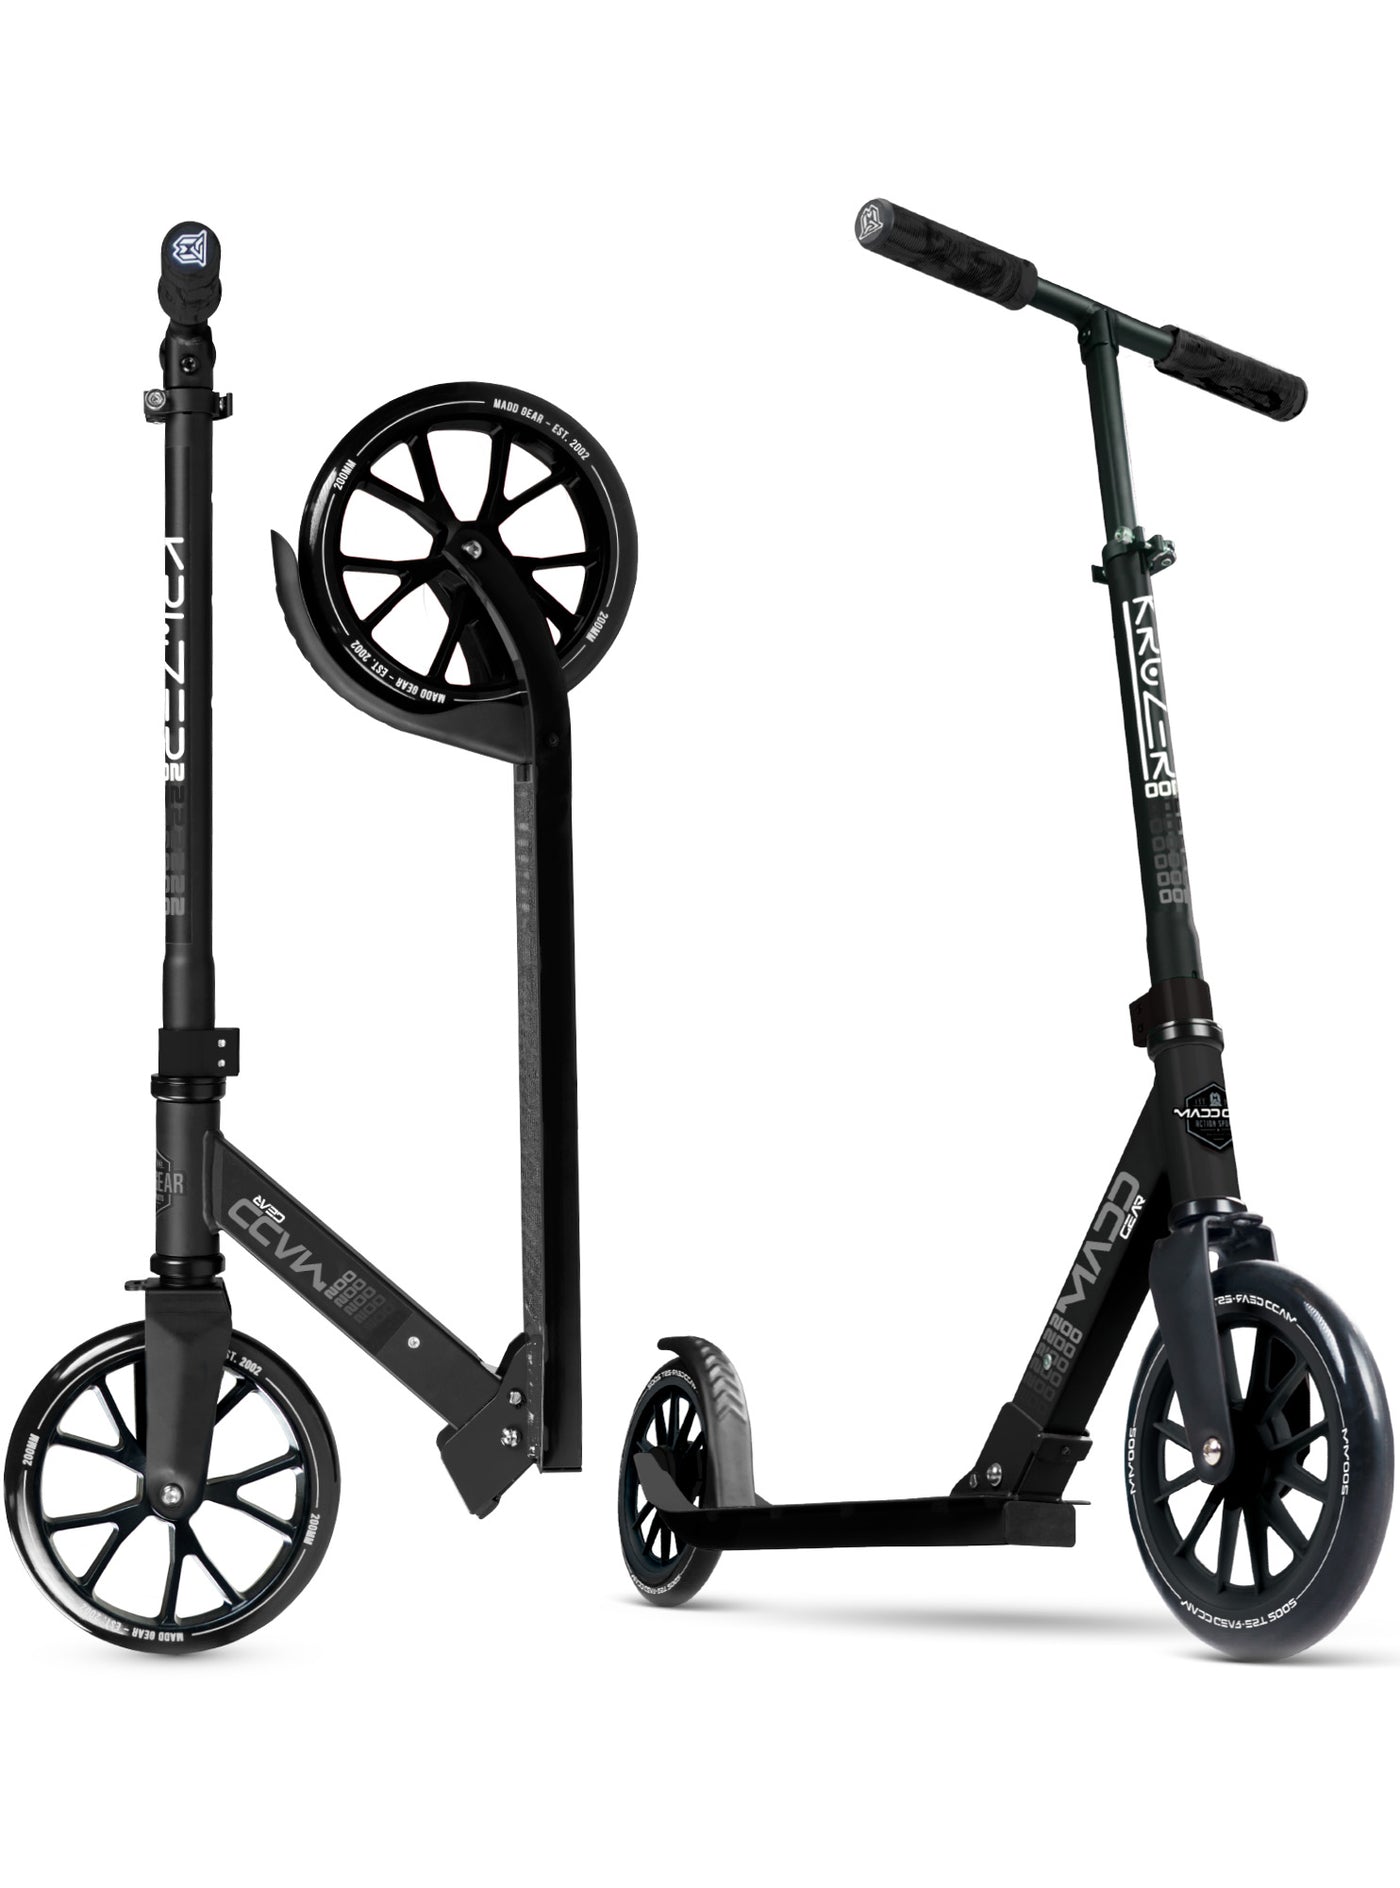 MG Kruzer 200 Folding Commuter Scooter in Black – Stylish design, perfect for urban commuting and leisure rides